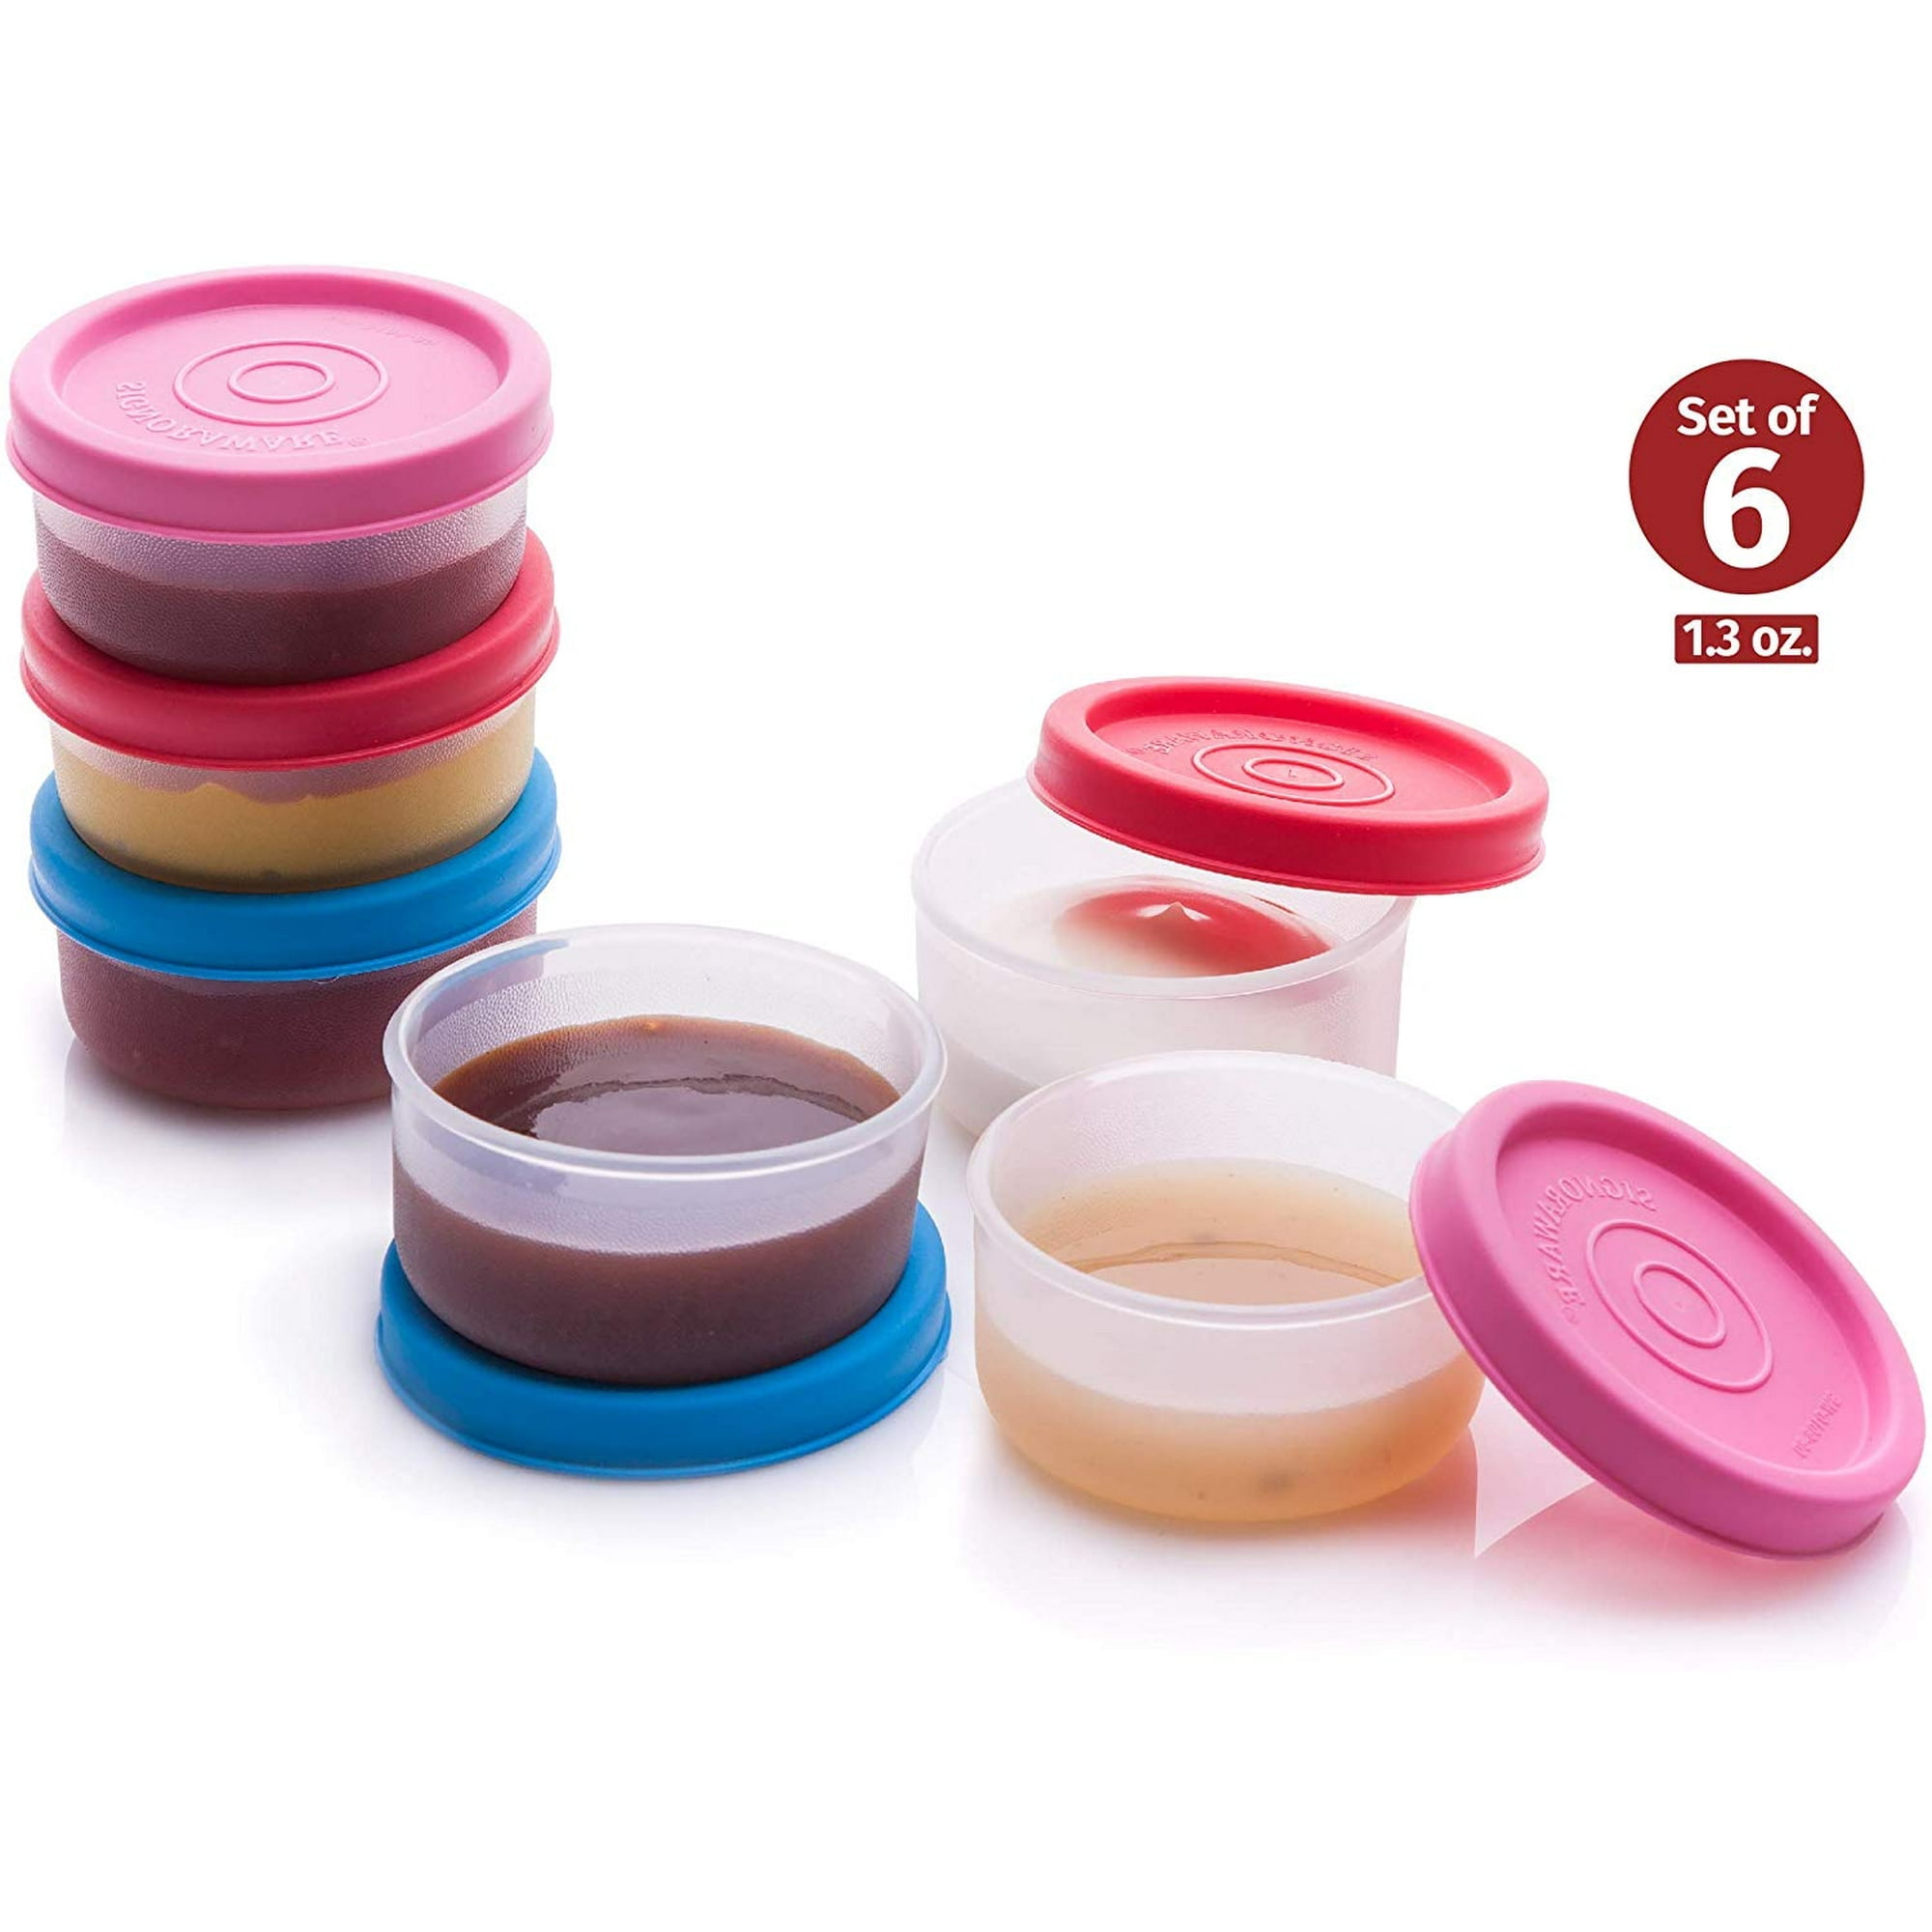 Leakproof Portion Control Lunch Containers - Reusable Meal Prep Containers, No BPA - Set of 4 (Sorbet)